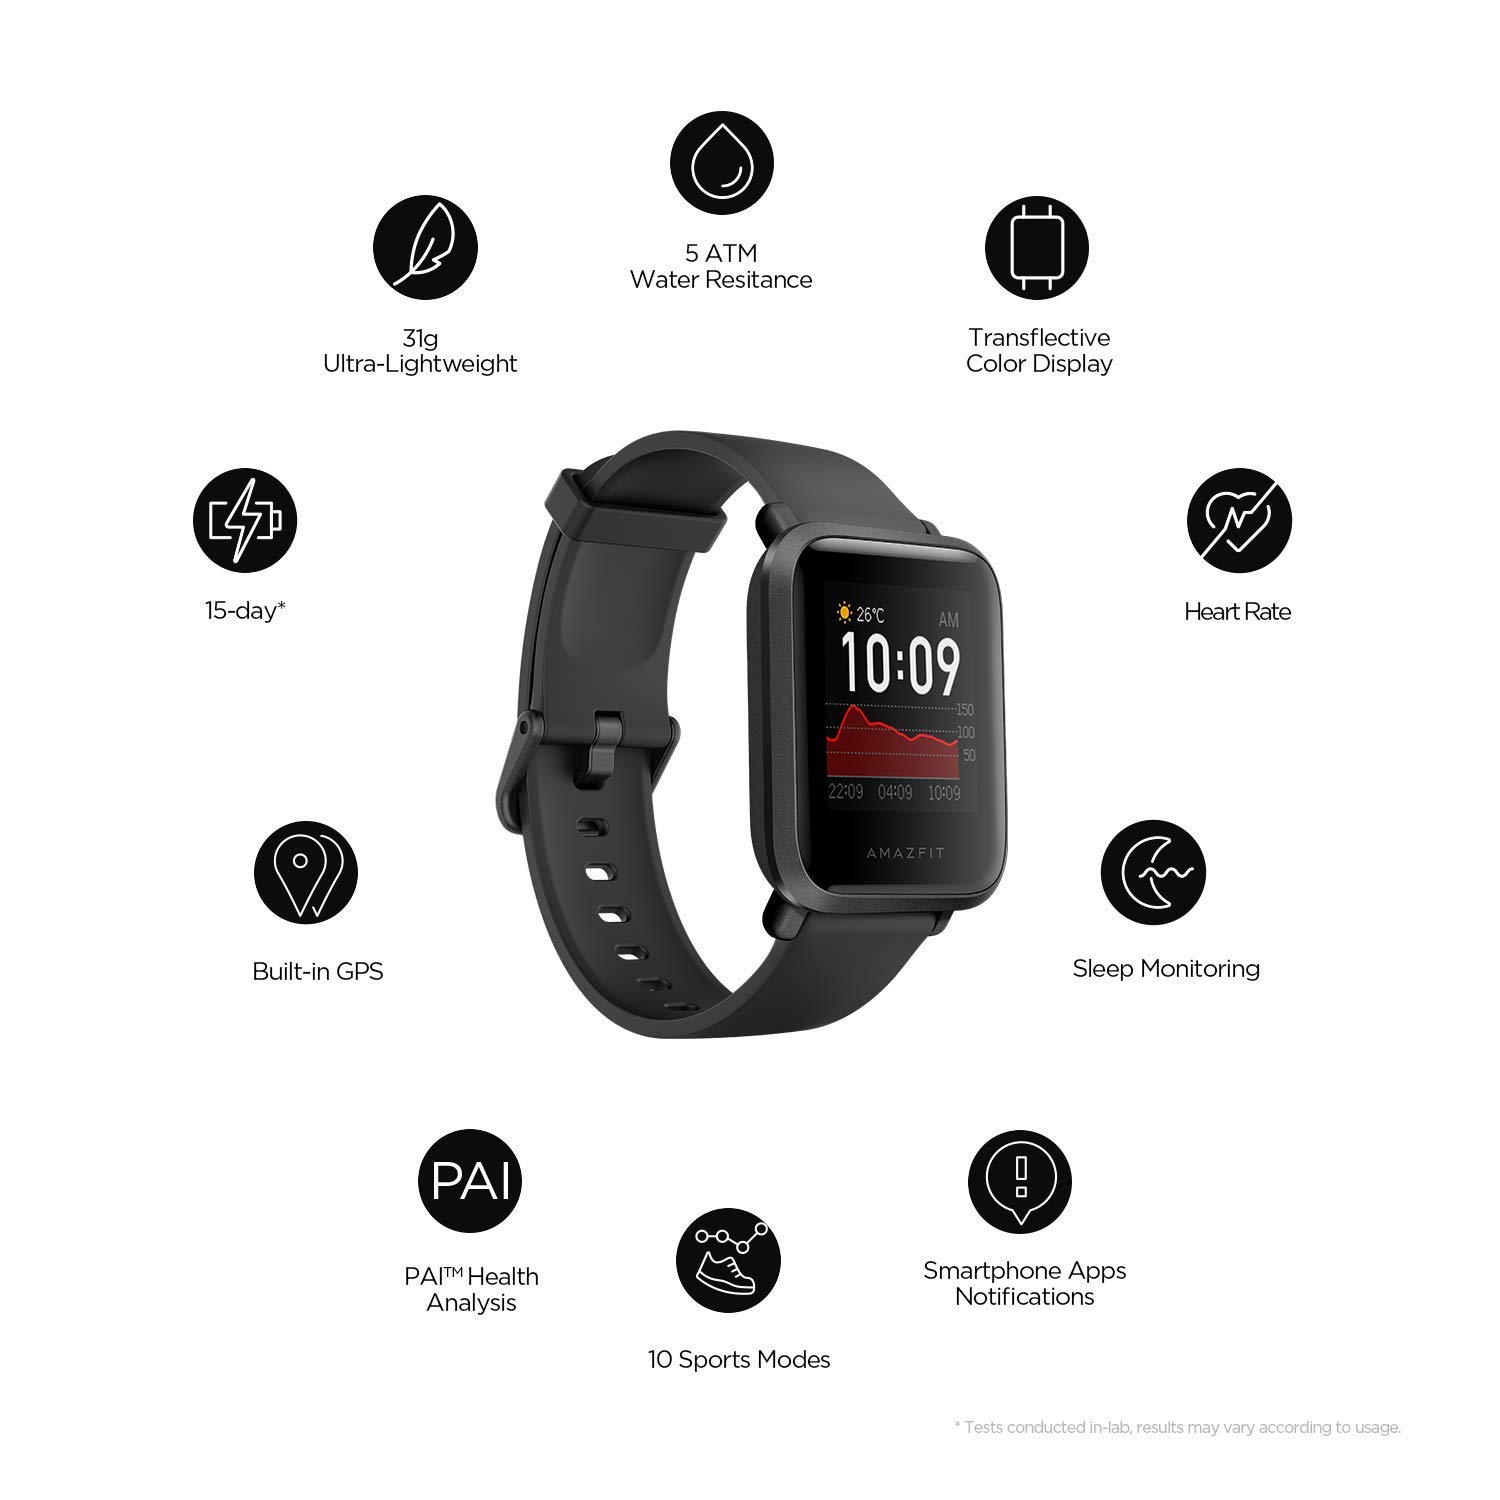 Amazfit Bip S Smart Watch with Built -in GPS